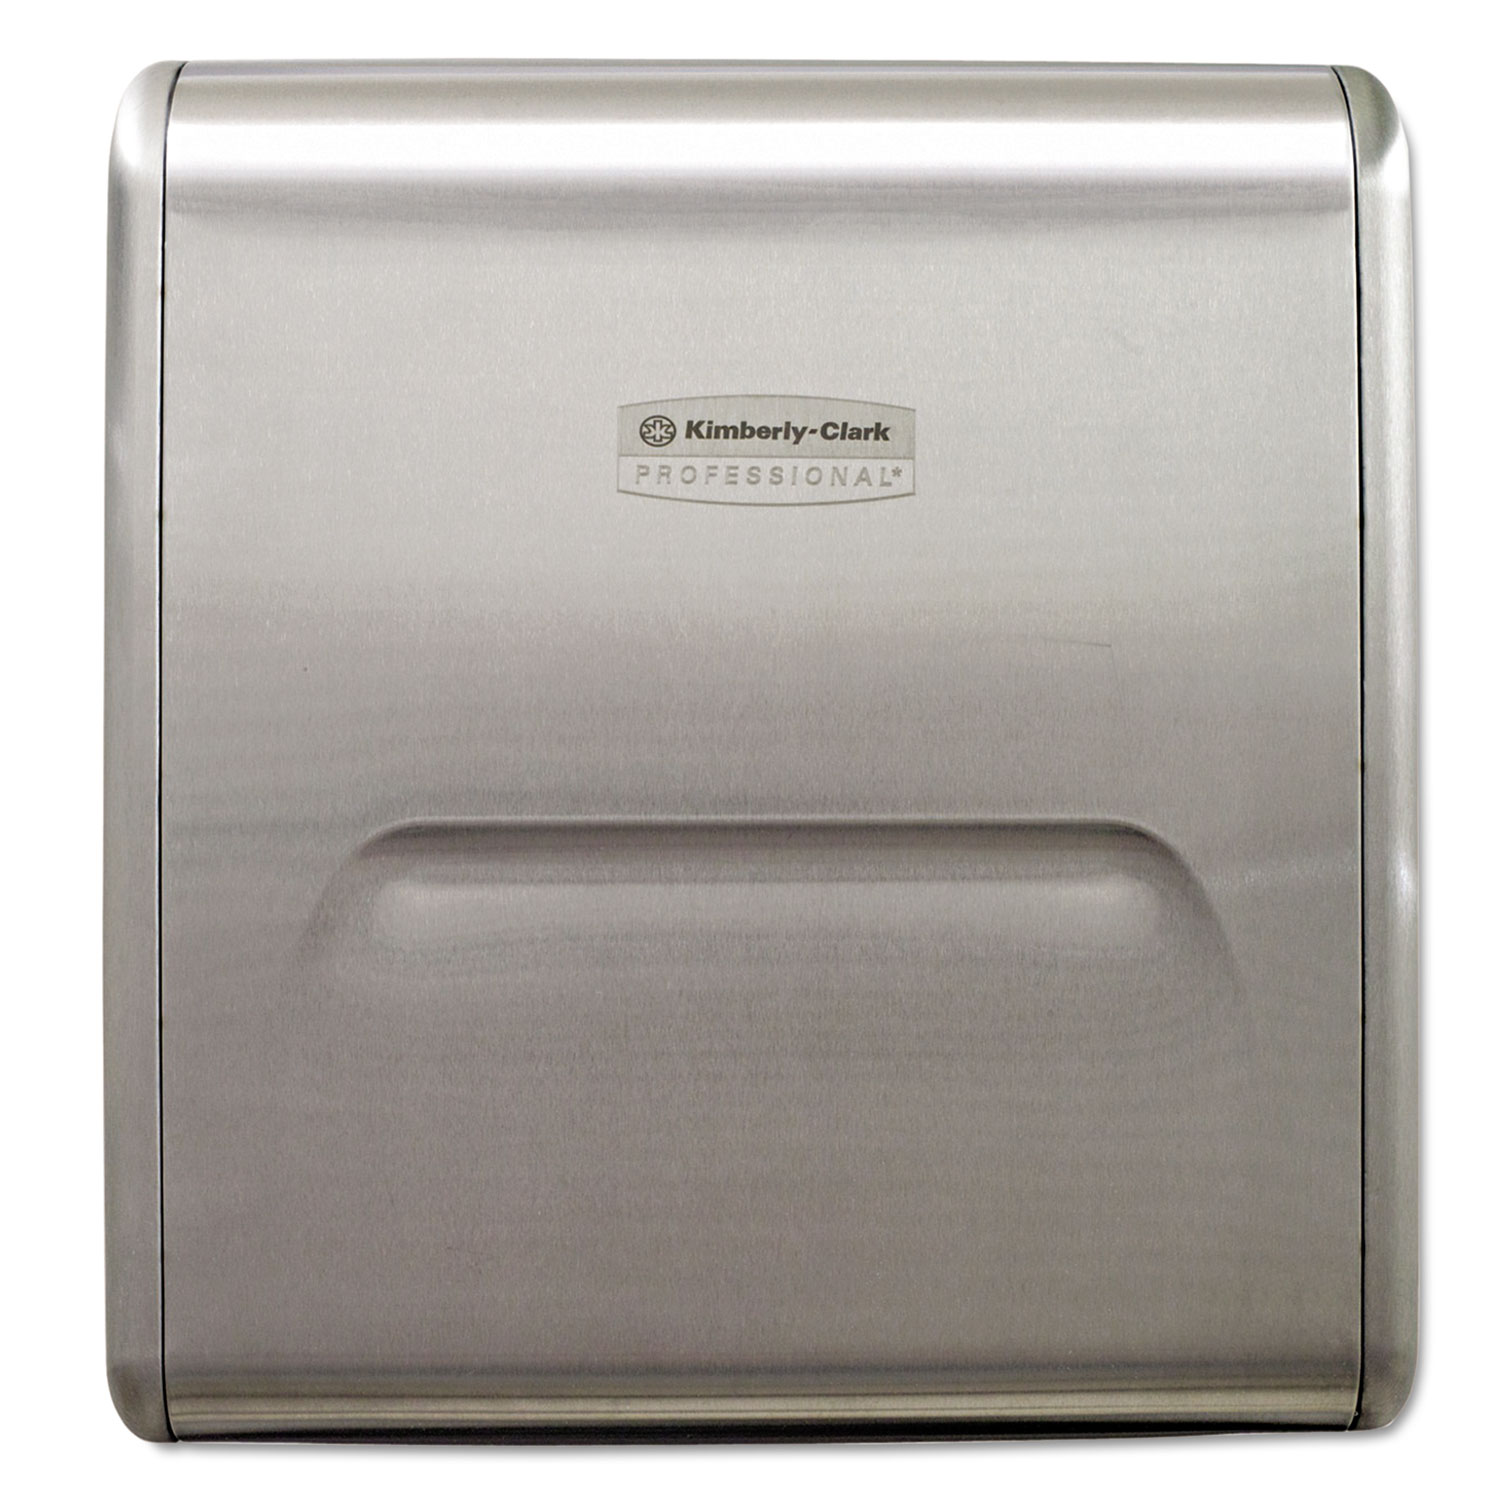  Kimberly-Clark Professional* 31501 Mod Stainless Steel Recessed Dispenser Housing, 11.13 x 4 x 15.37 (KCC31501) 